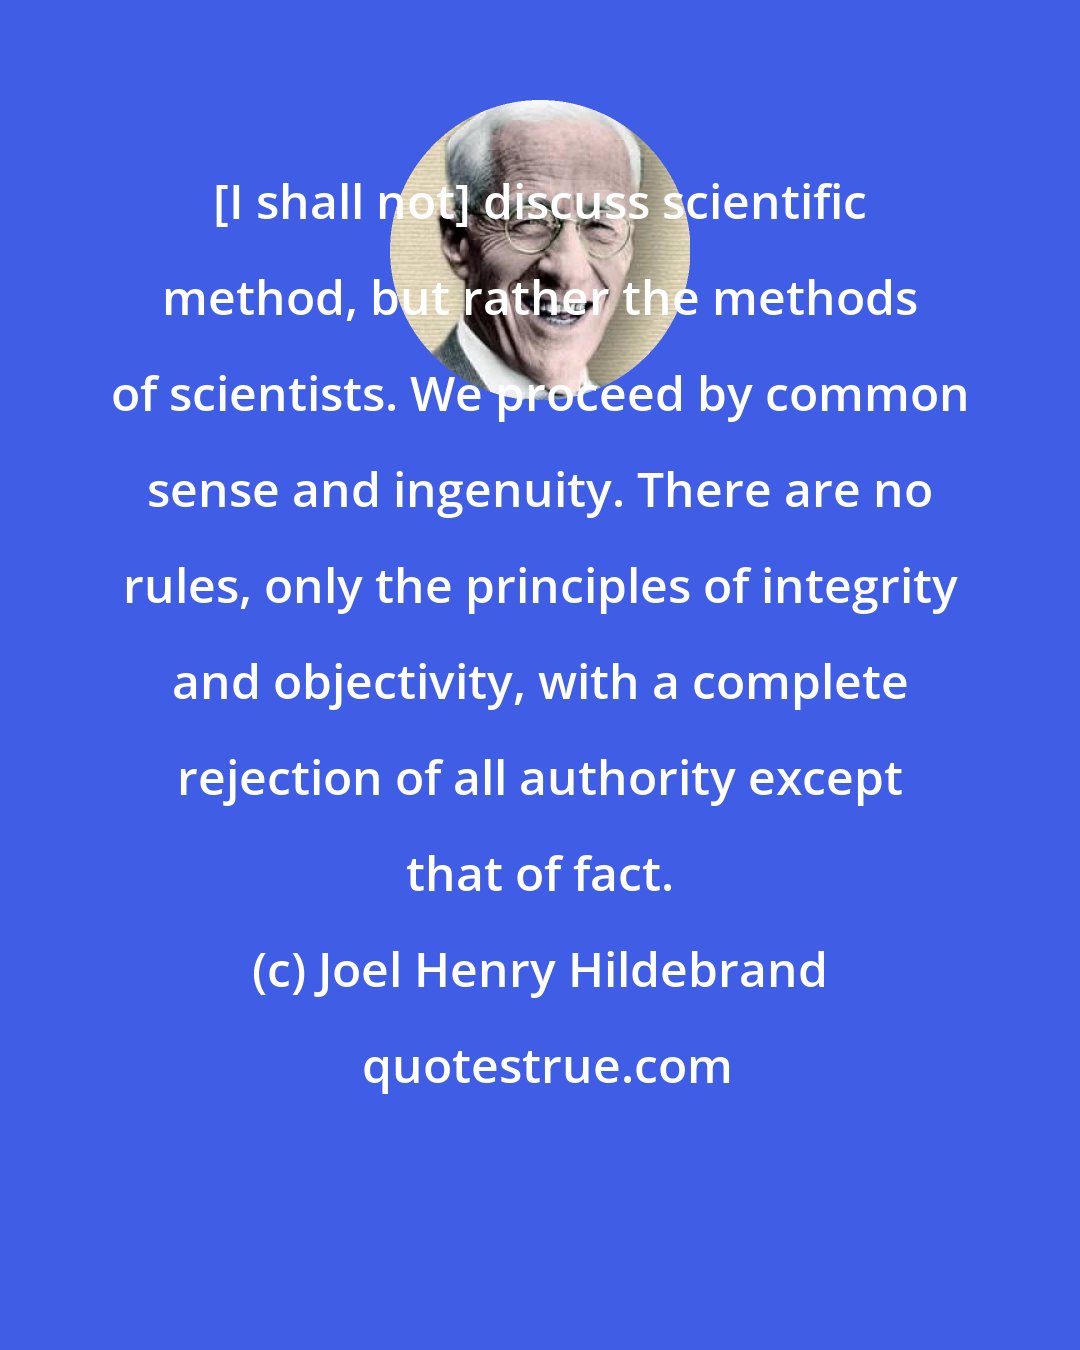 Joel Henry Hildebrand: [I shall not] discuss scientific method, but rather the methods of scientists. We proceed by common sense and ingenuity. There are no rules, only the principles of integrity and objectivity, with a complete rejection of all authority except that of fact.